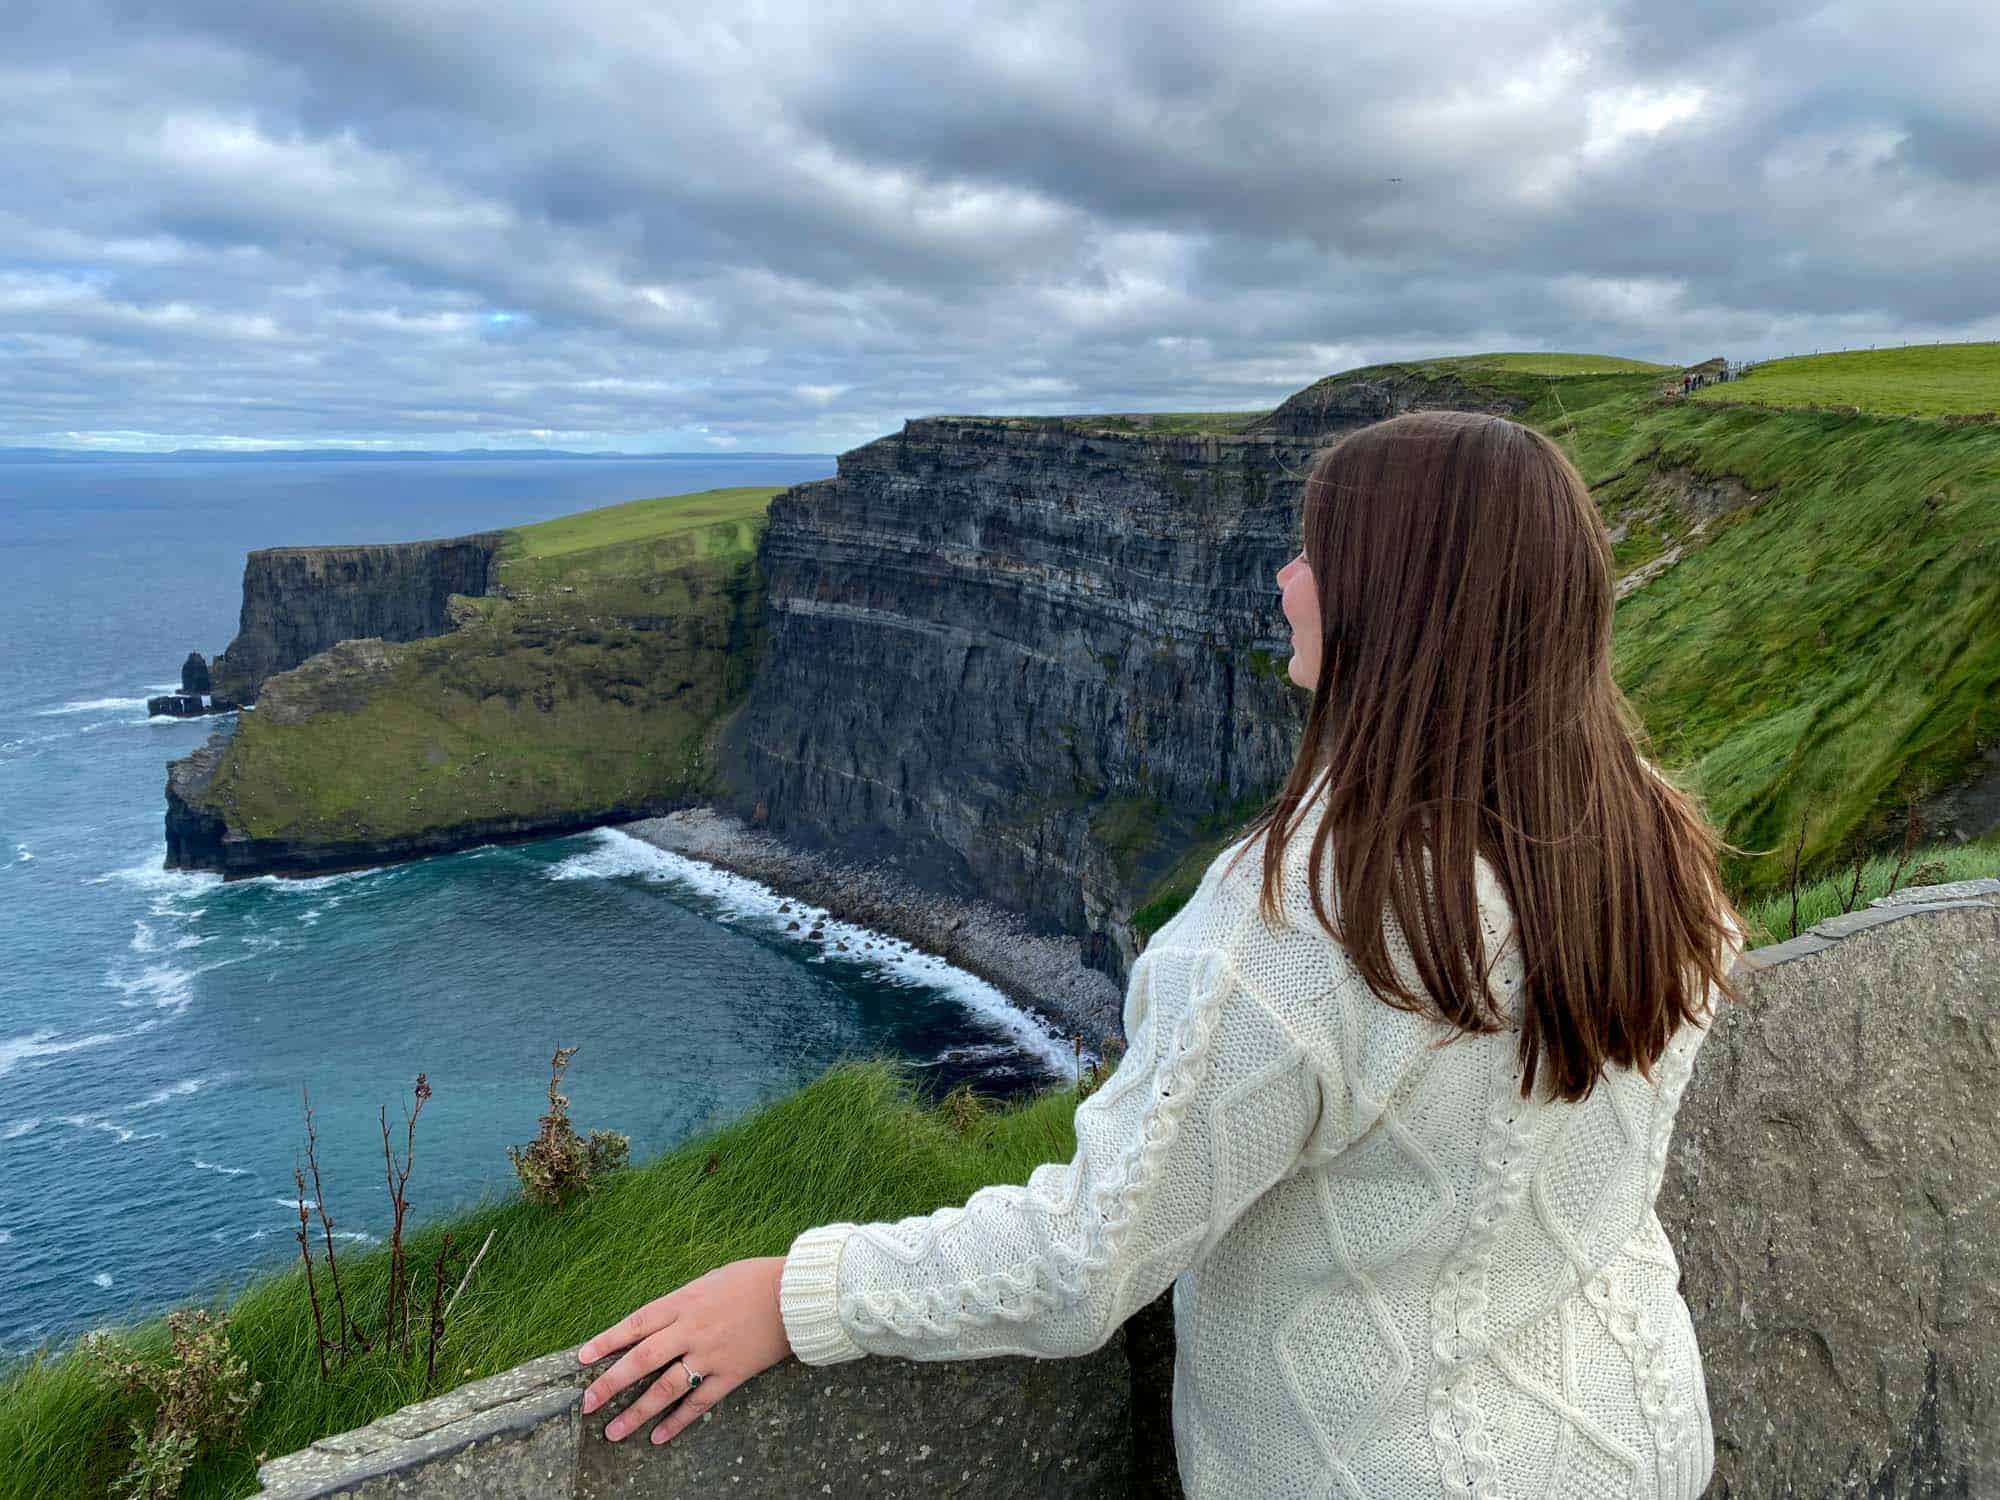 Amanda looking out over the Cliffs of Moher